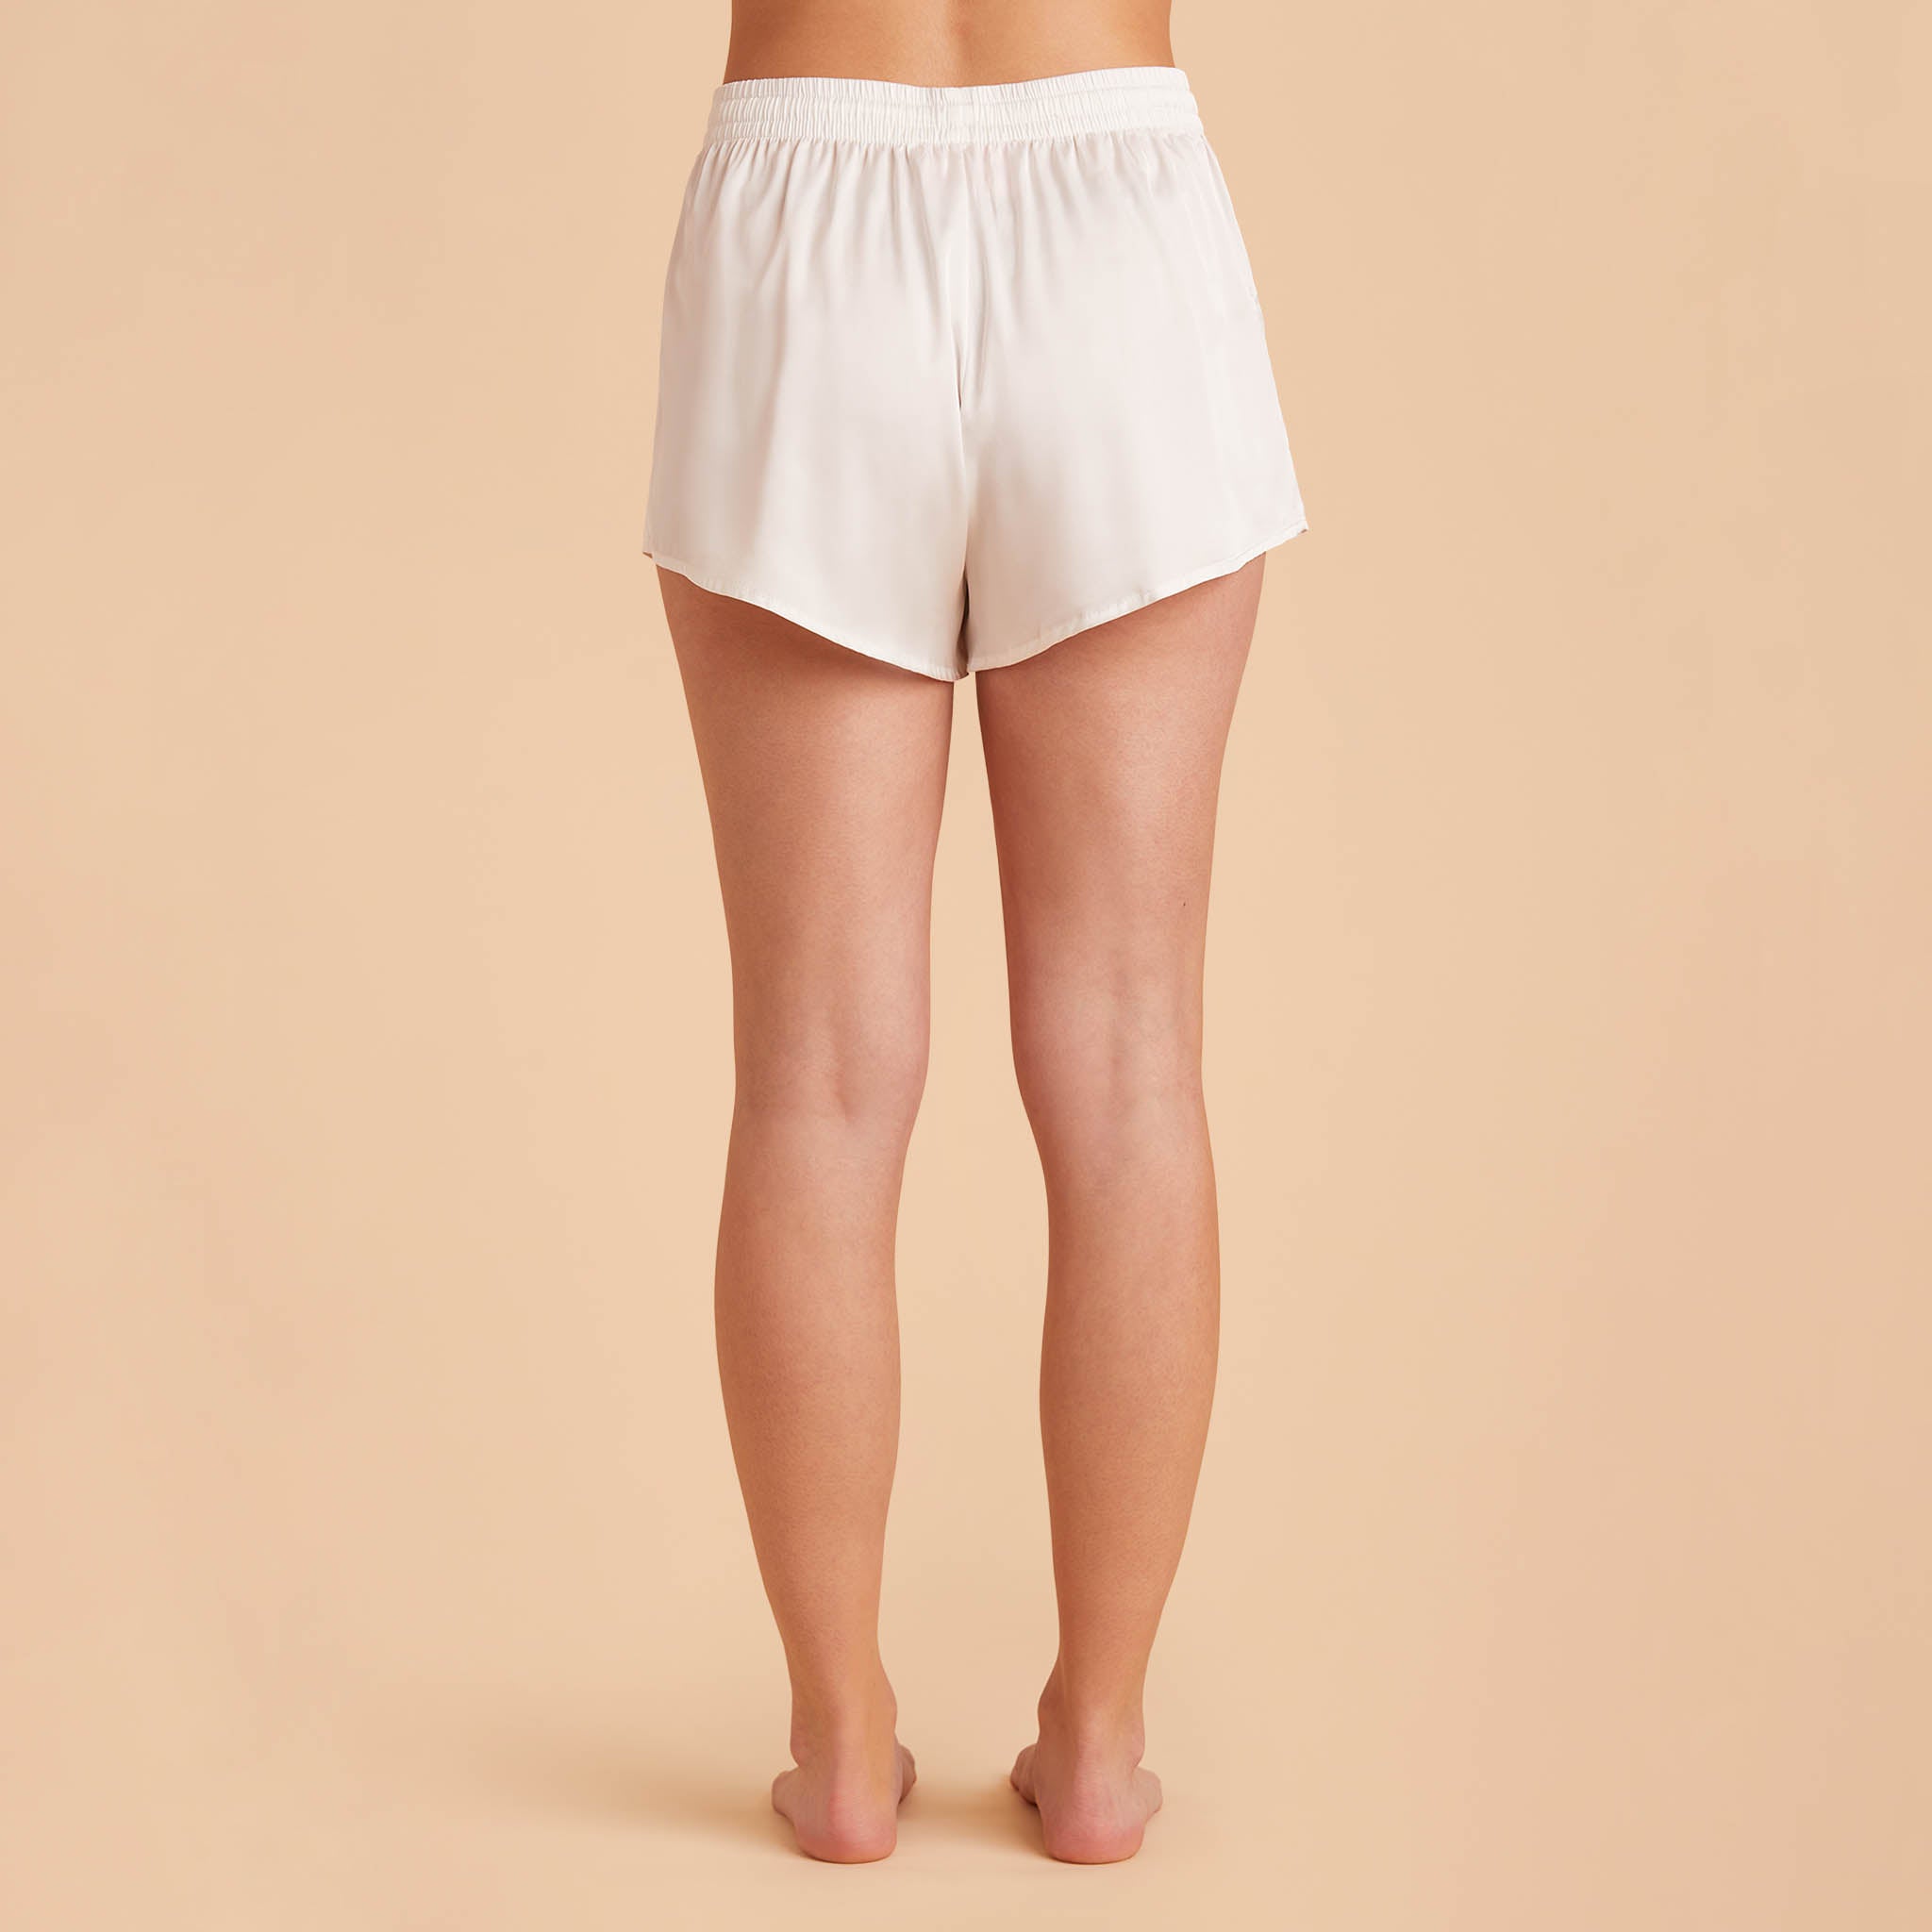 Olivia PJ Shorts in ivory back view